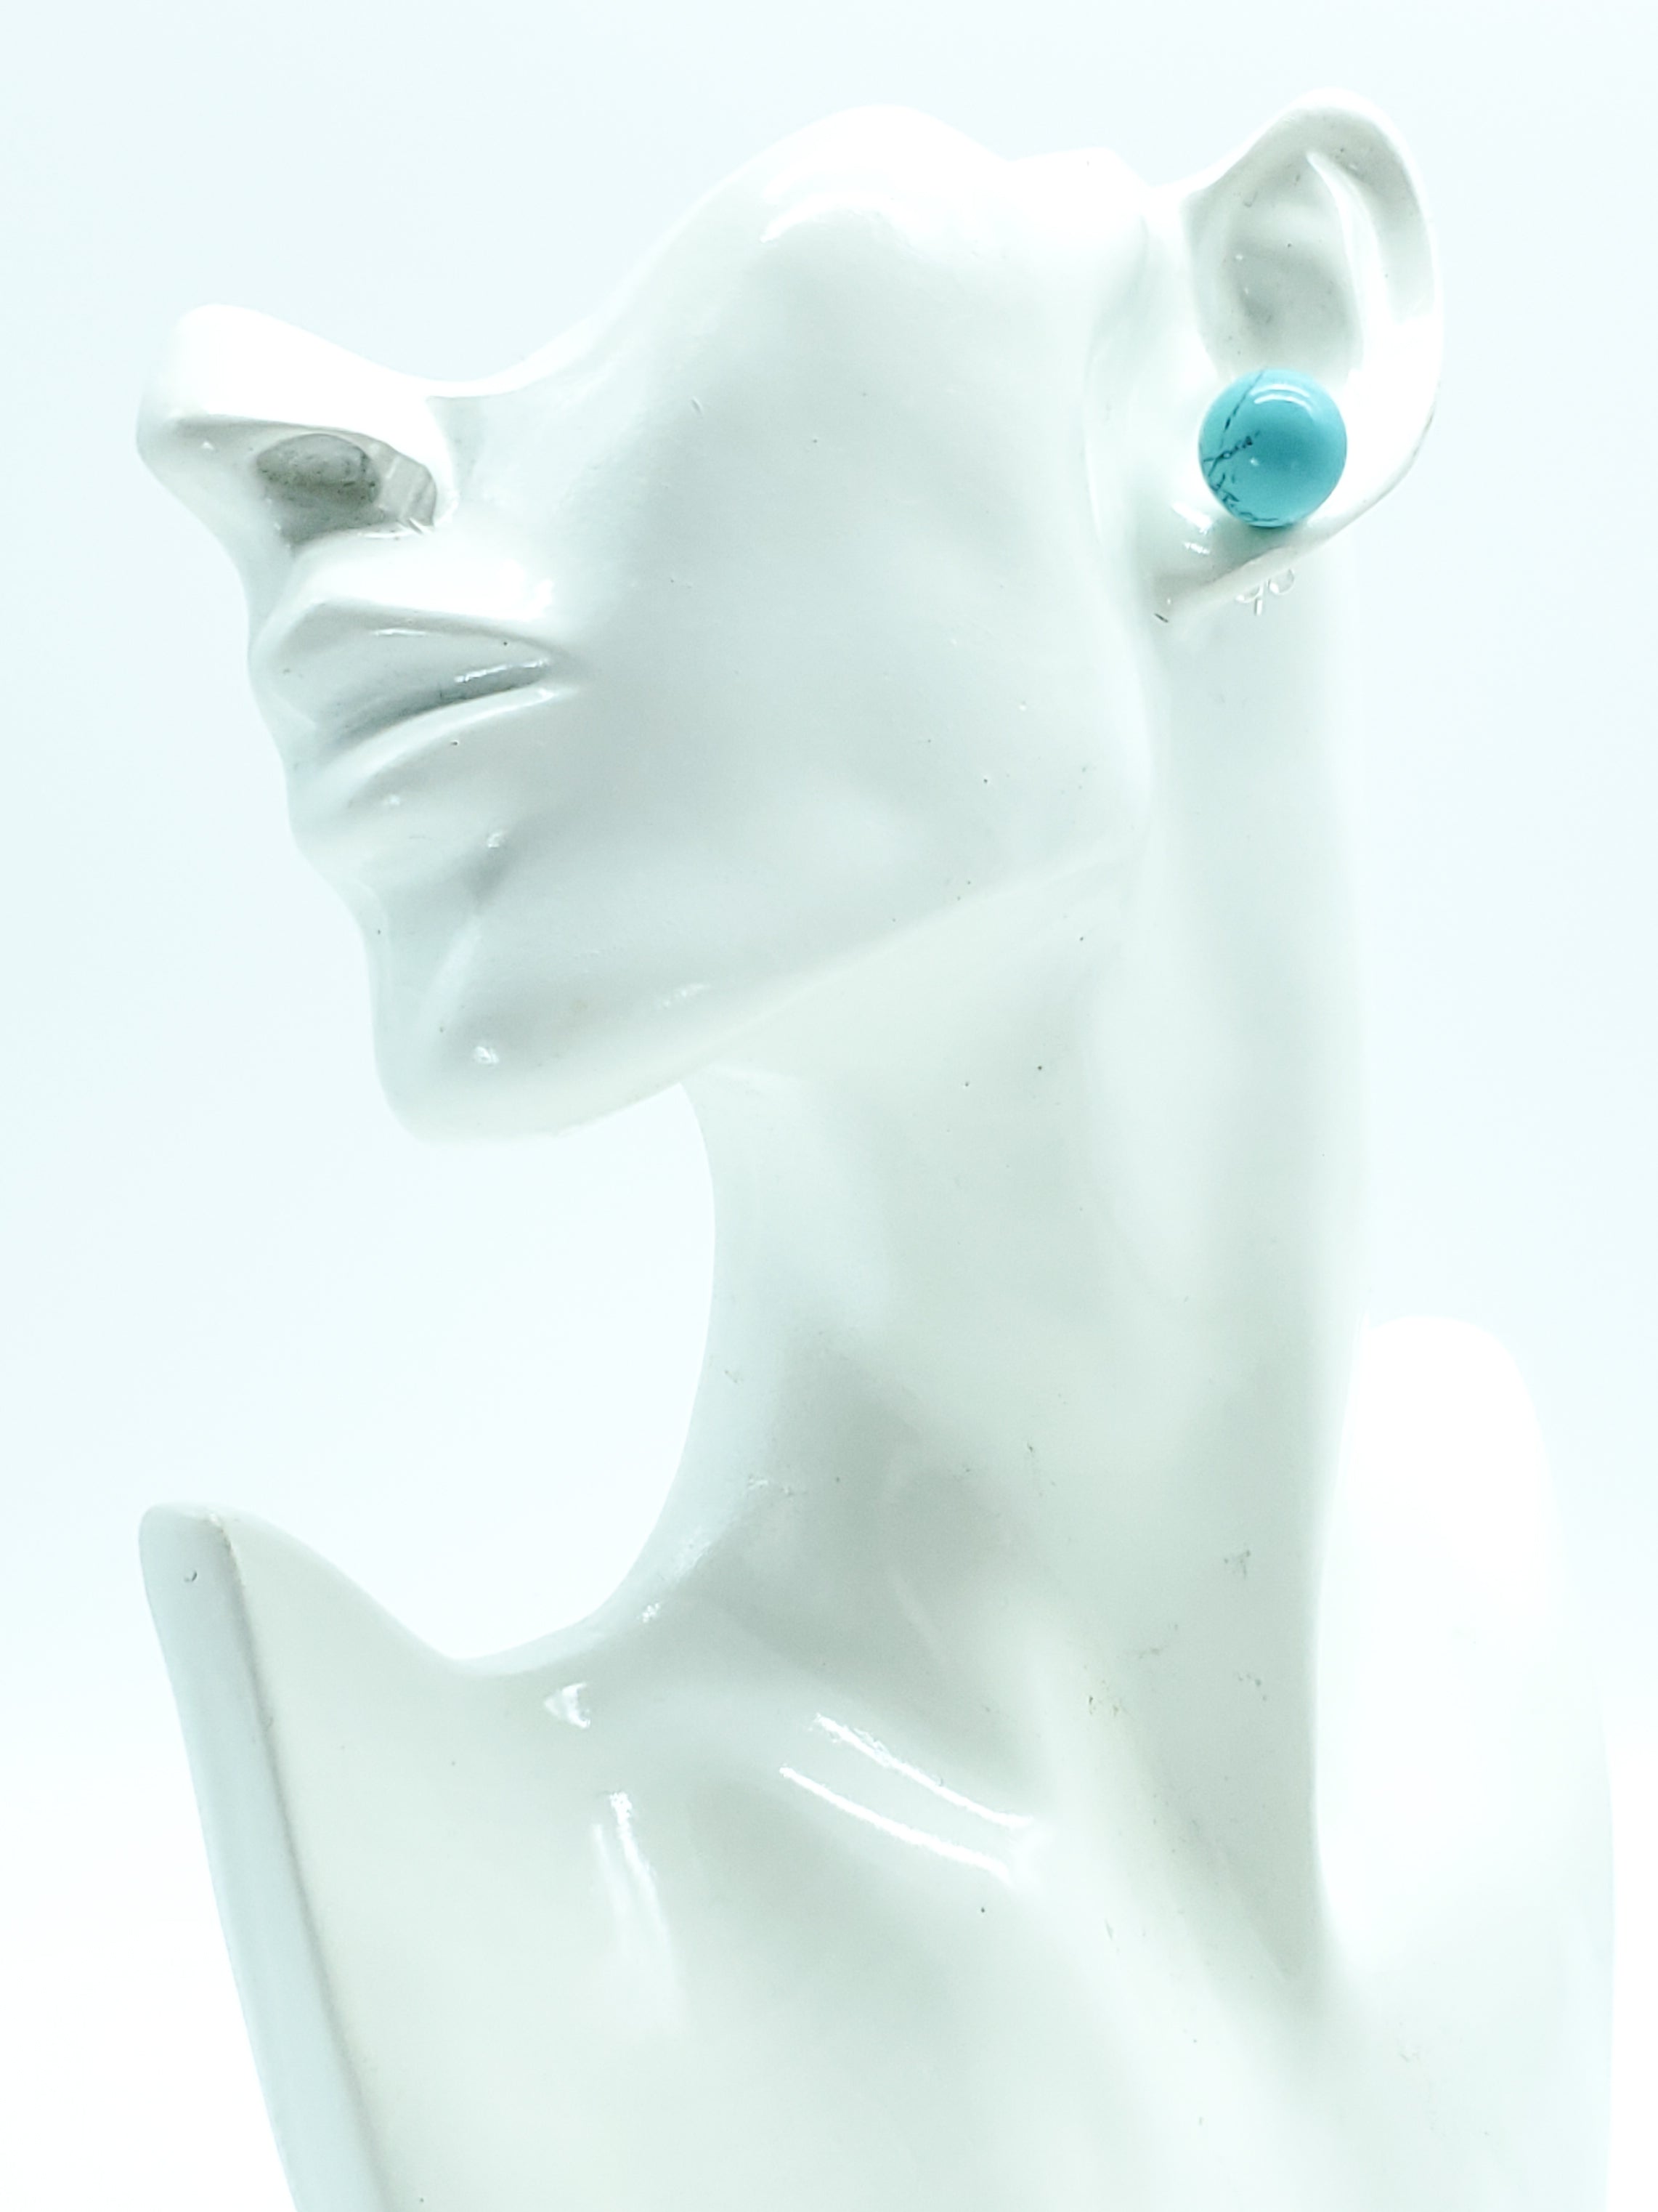 Turquoise Earrings on Sterling Silver Studs - The Caffeinated Raven